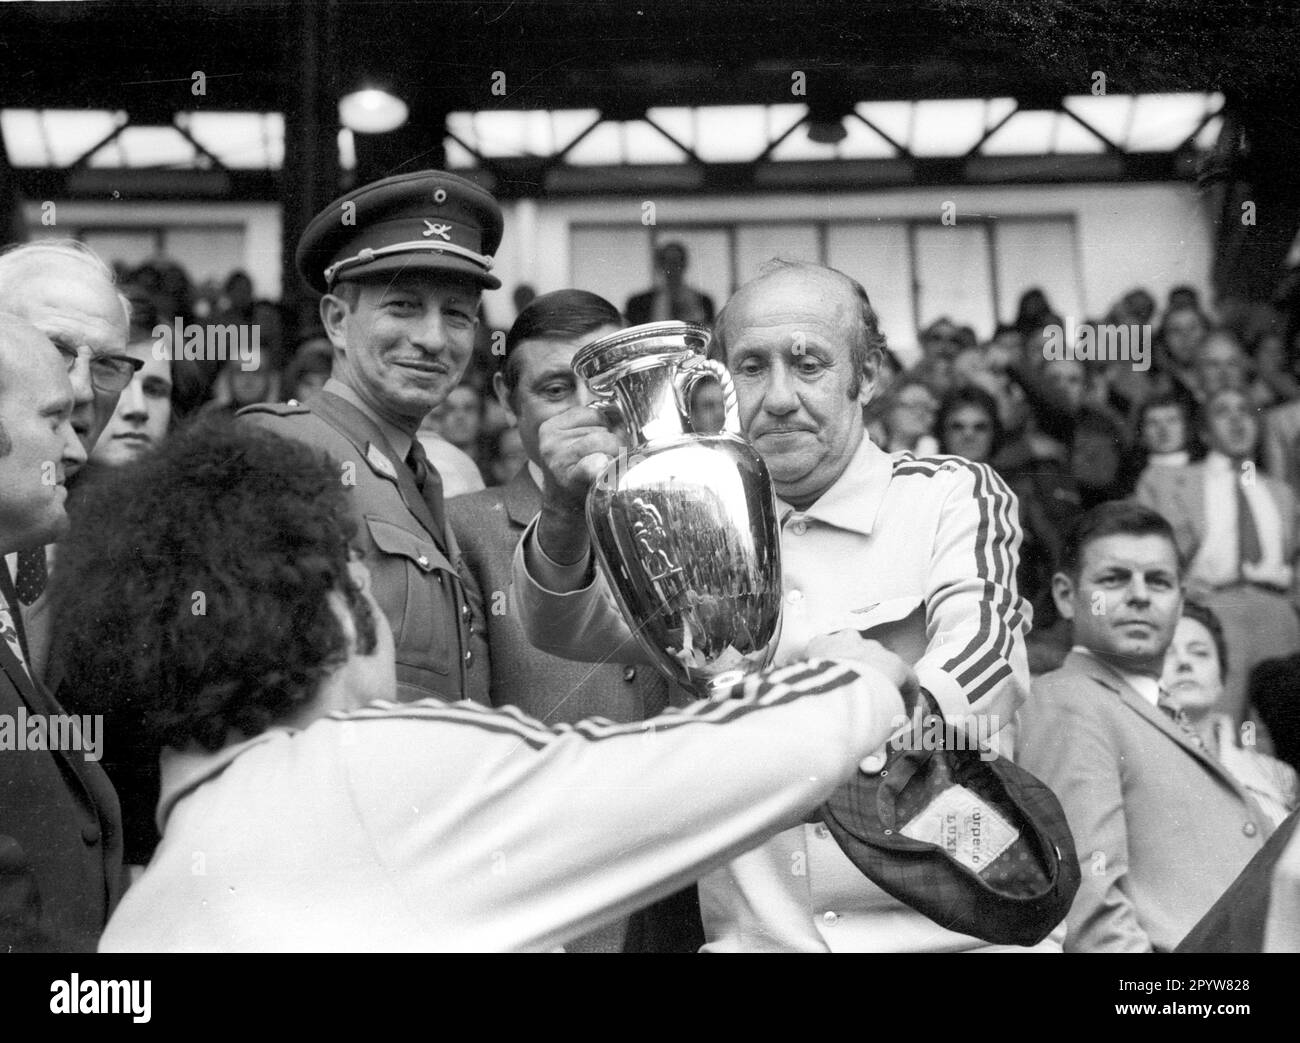 EM72 Final Germany - Russia 3:0 in Brussels: Franz Beckenbauer hands over the EM - Cup to national coach Helmut Schön [automated translation] Stock Photo